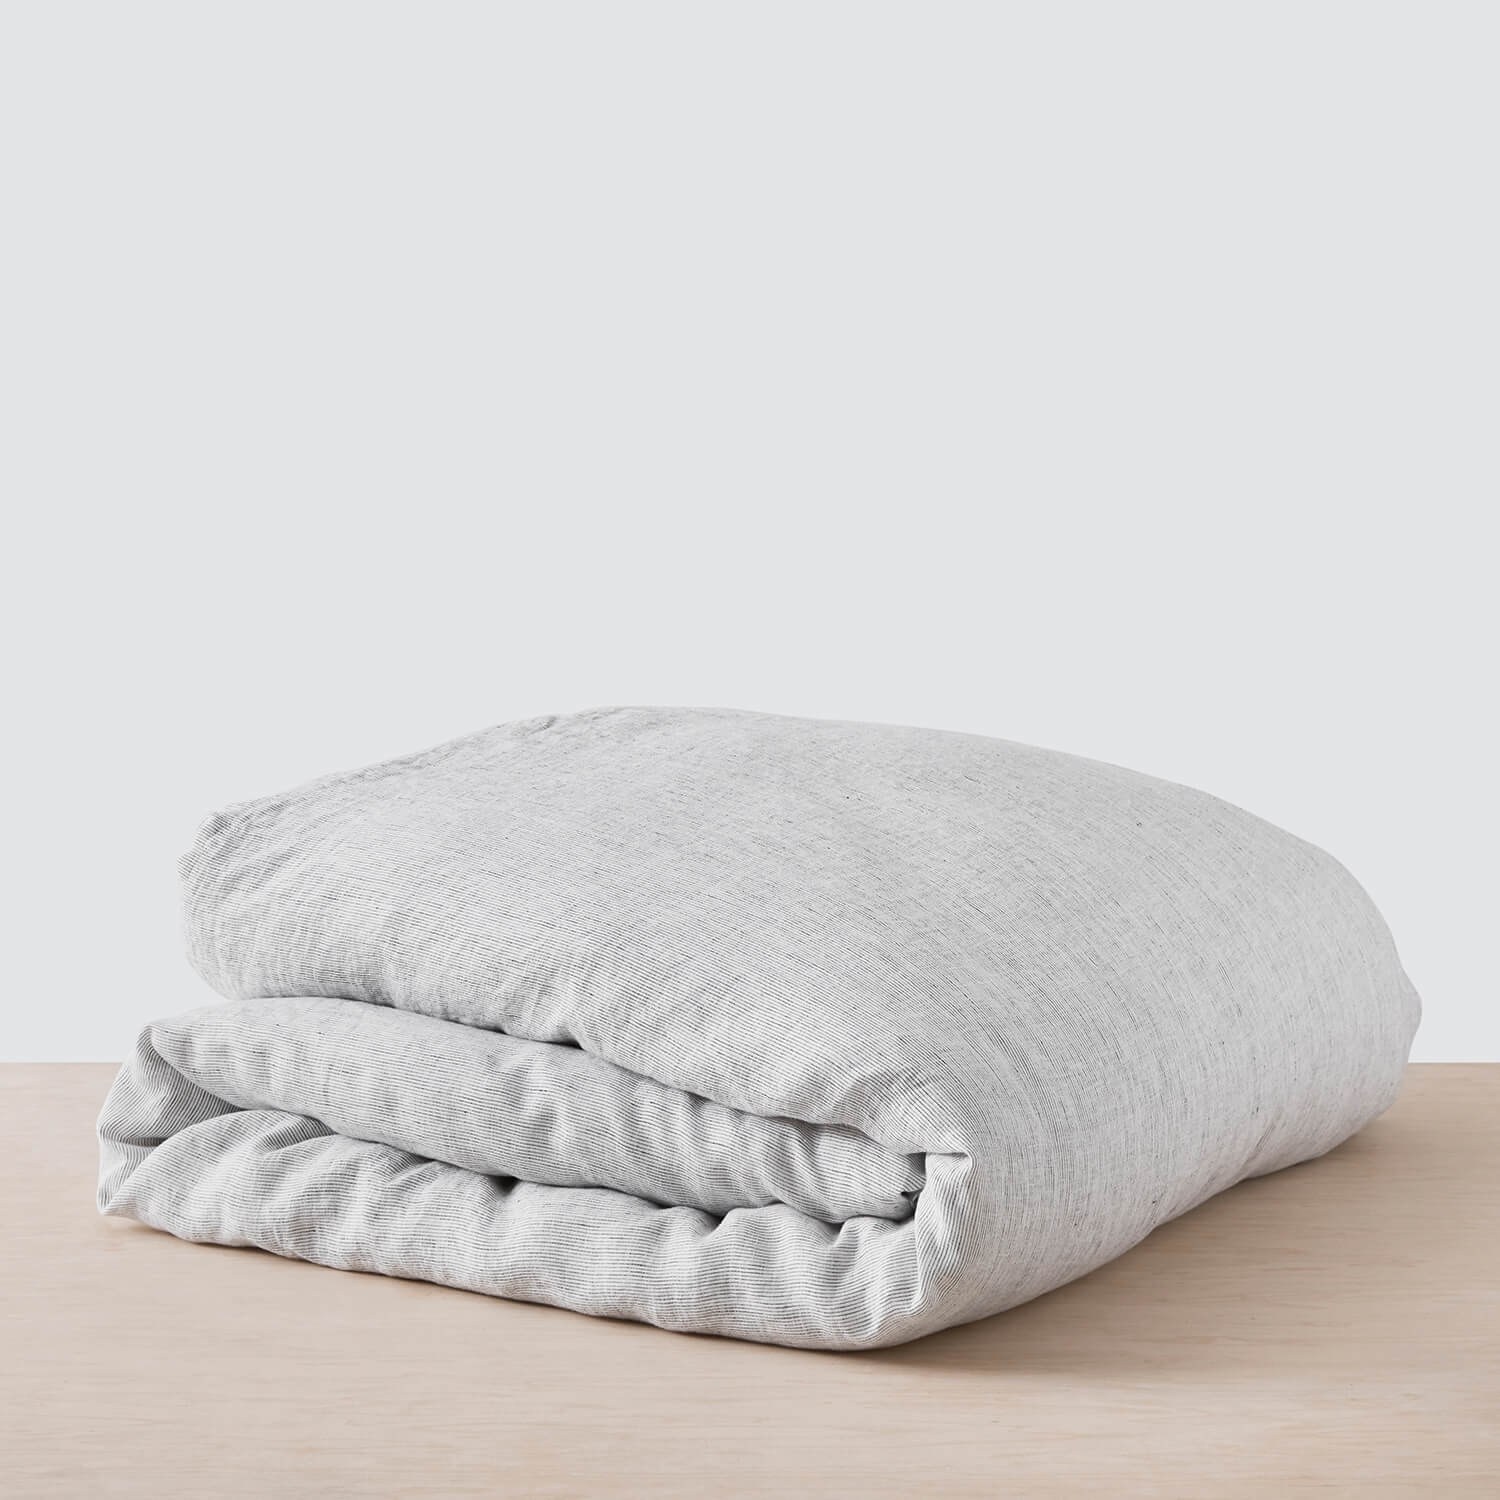 The Citizenry Stonewashed Linen Duvet Cover | Full/Queen | Duvet Only | Indigo Chambray - Image 2